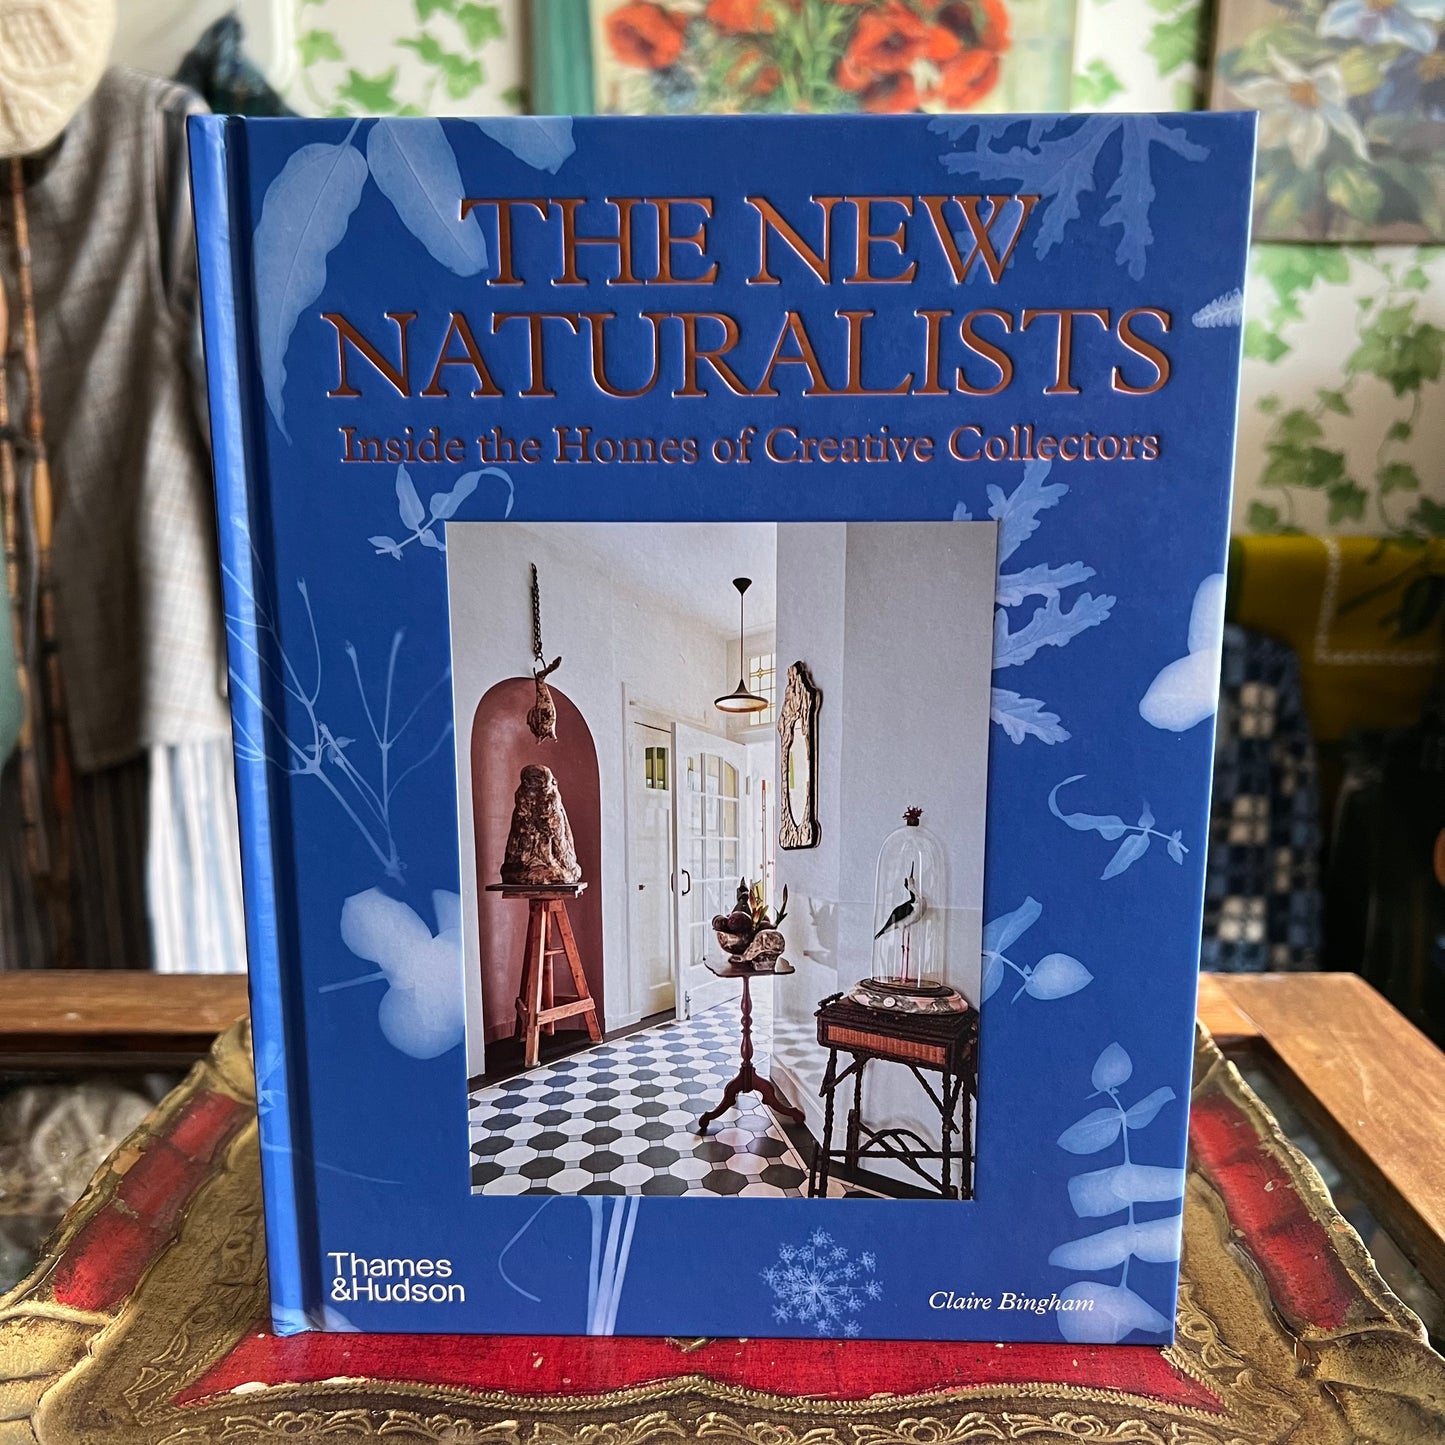 The New Naturalists by Claire Bingham